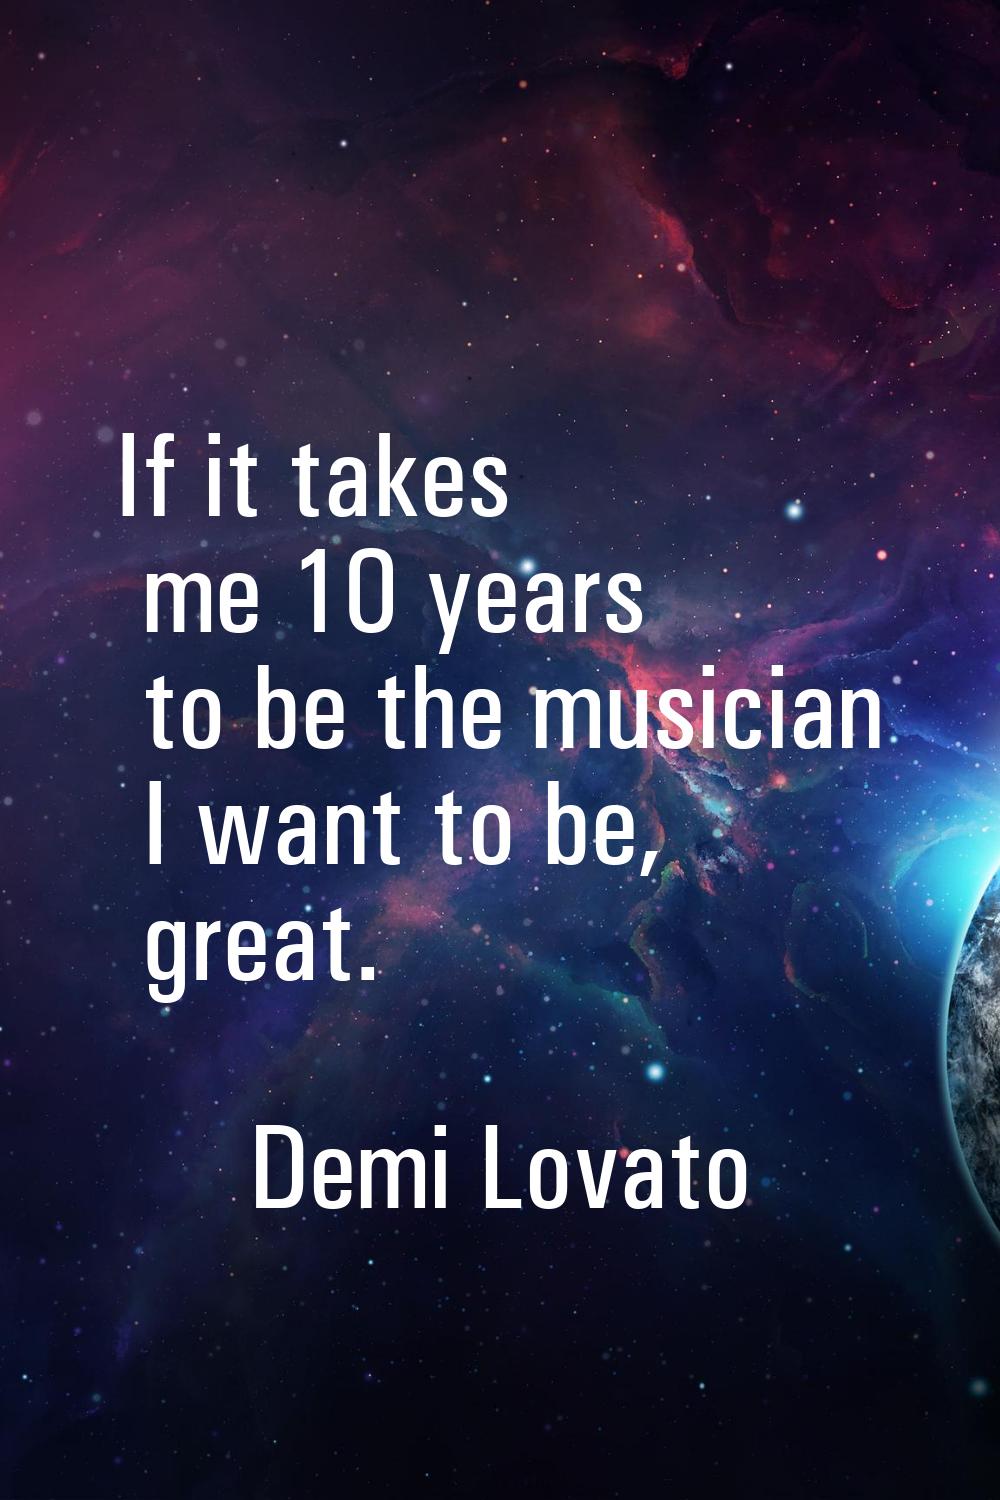 If it takes me 10 years to be the musician I want to be, great.